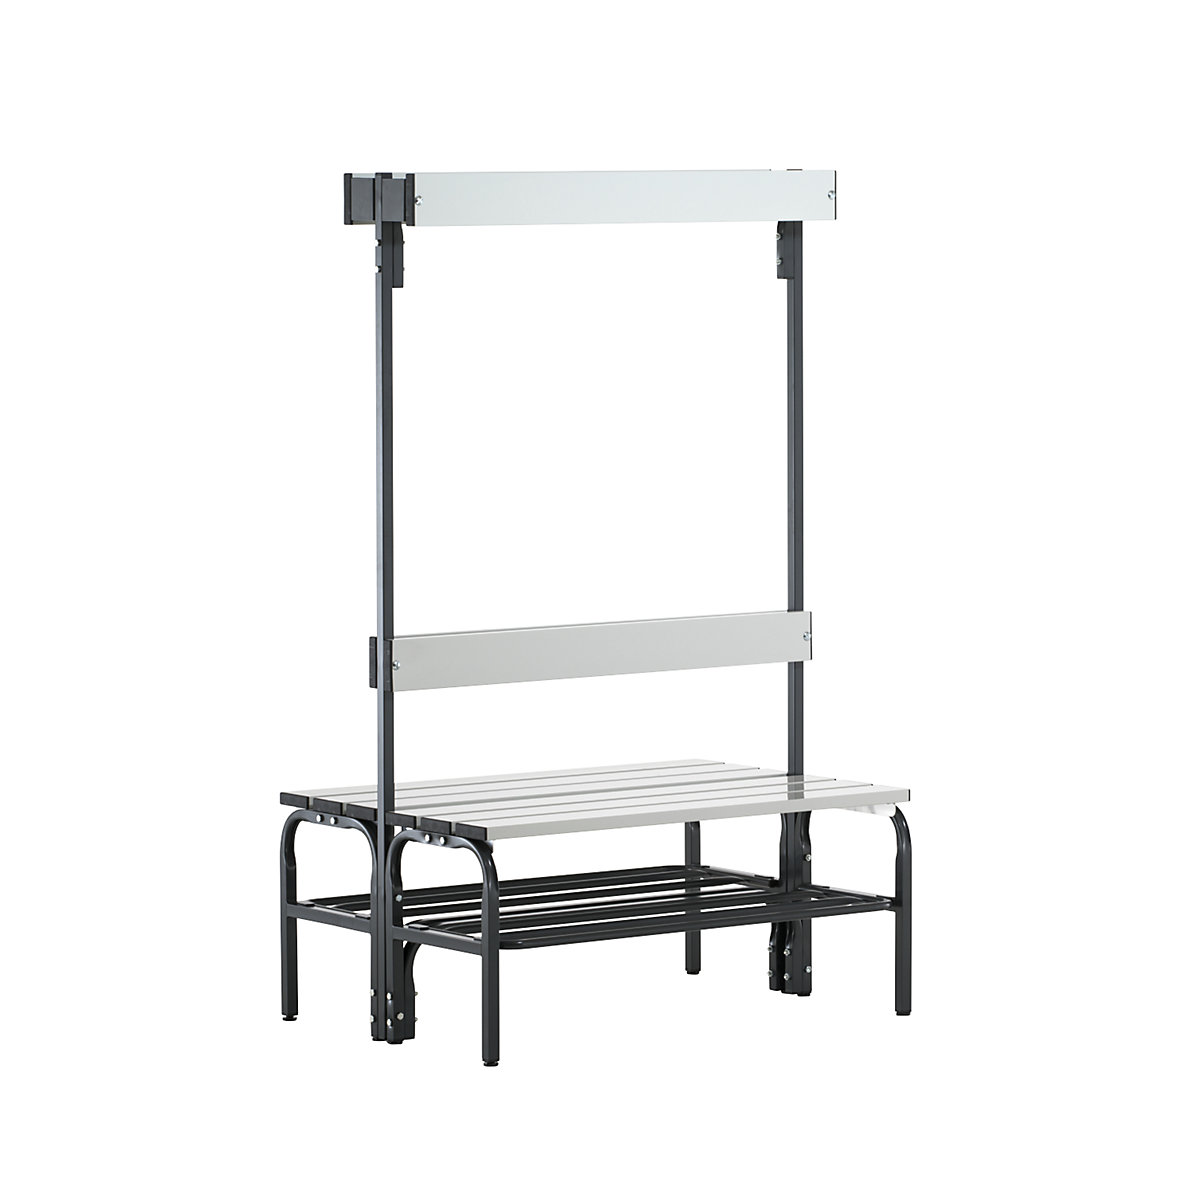 Sypro – Changing room bench made of stainless steel, HxD 1650 x 725 mm, length 1015 mm, 6 hooks, charcoal, shoe rack